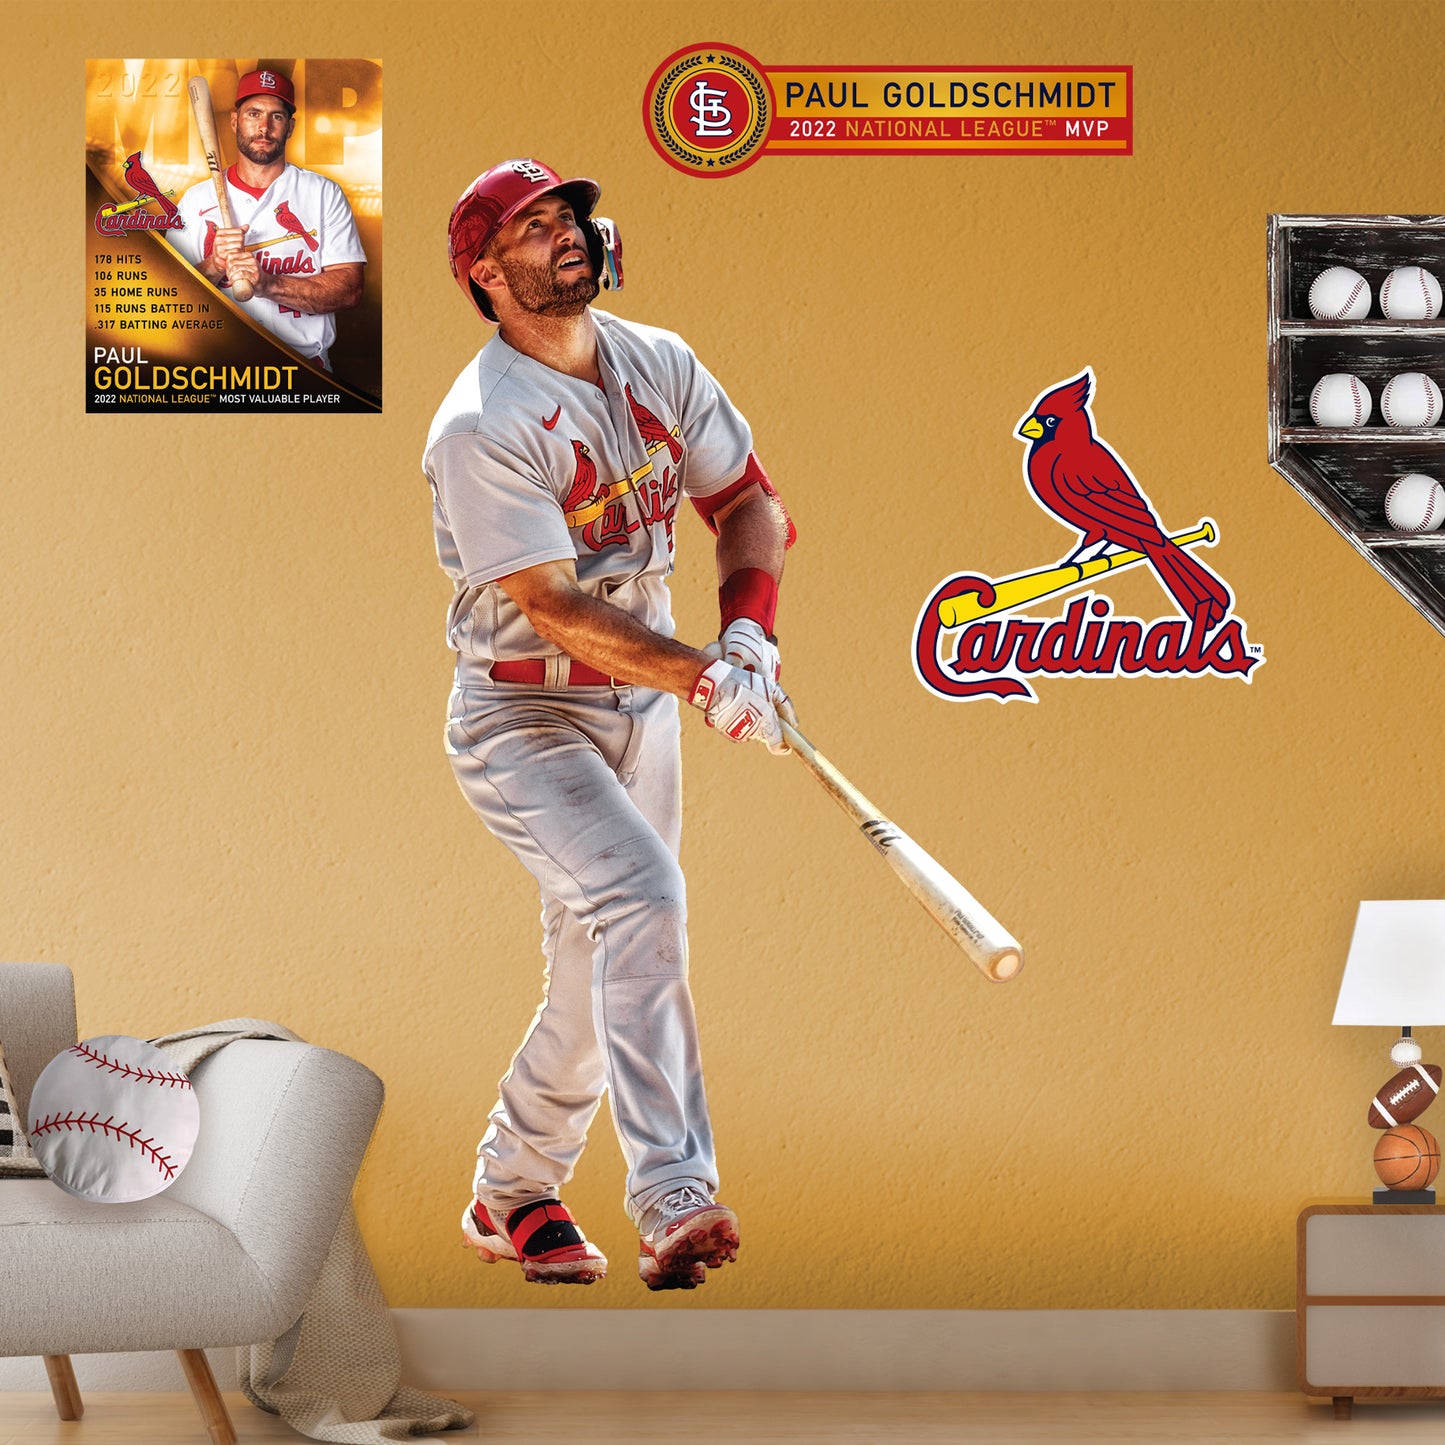 St. Louis Cardinals: Paul Goldschmidt 2022 National League MVP        - Officially Licensed MLB Removable     Adhesive Decal